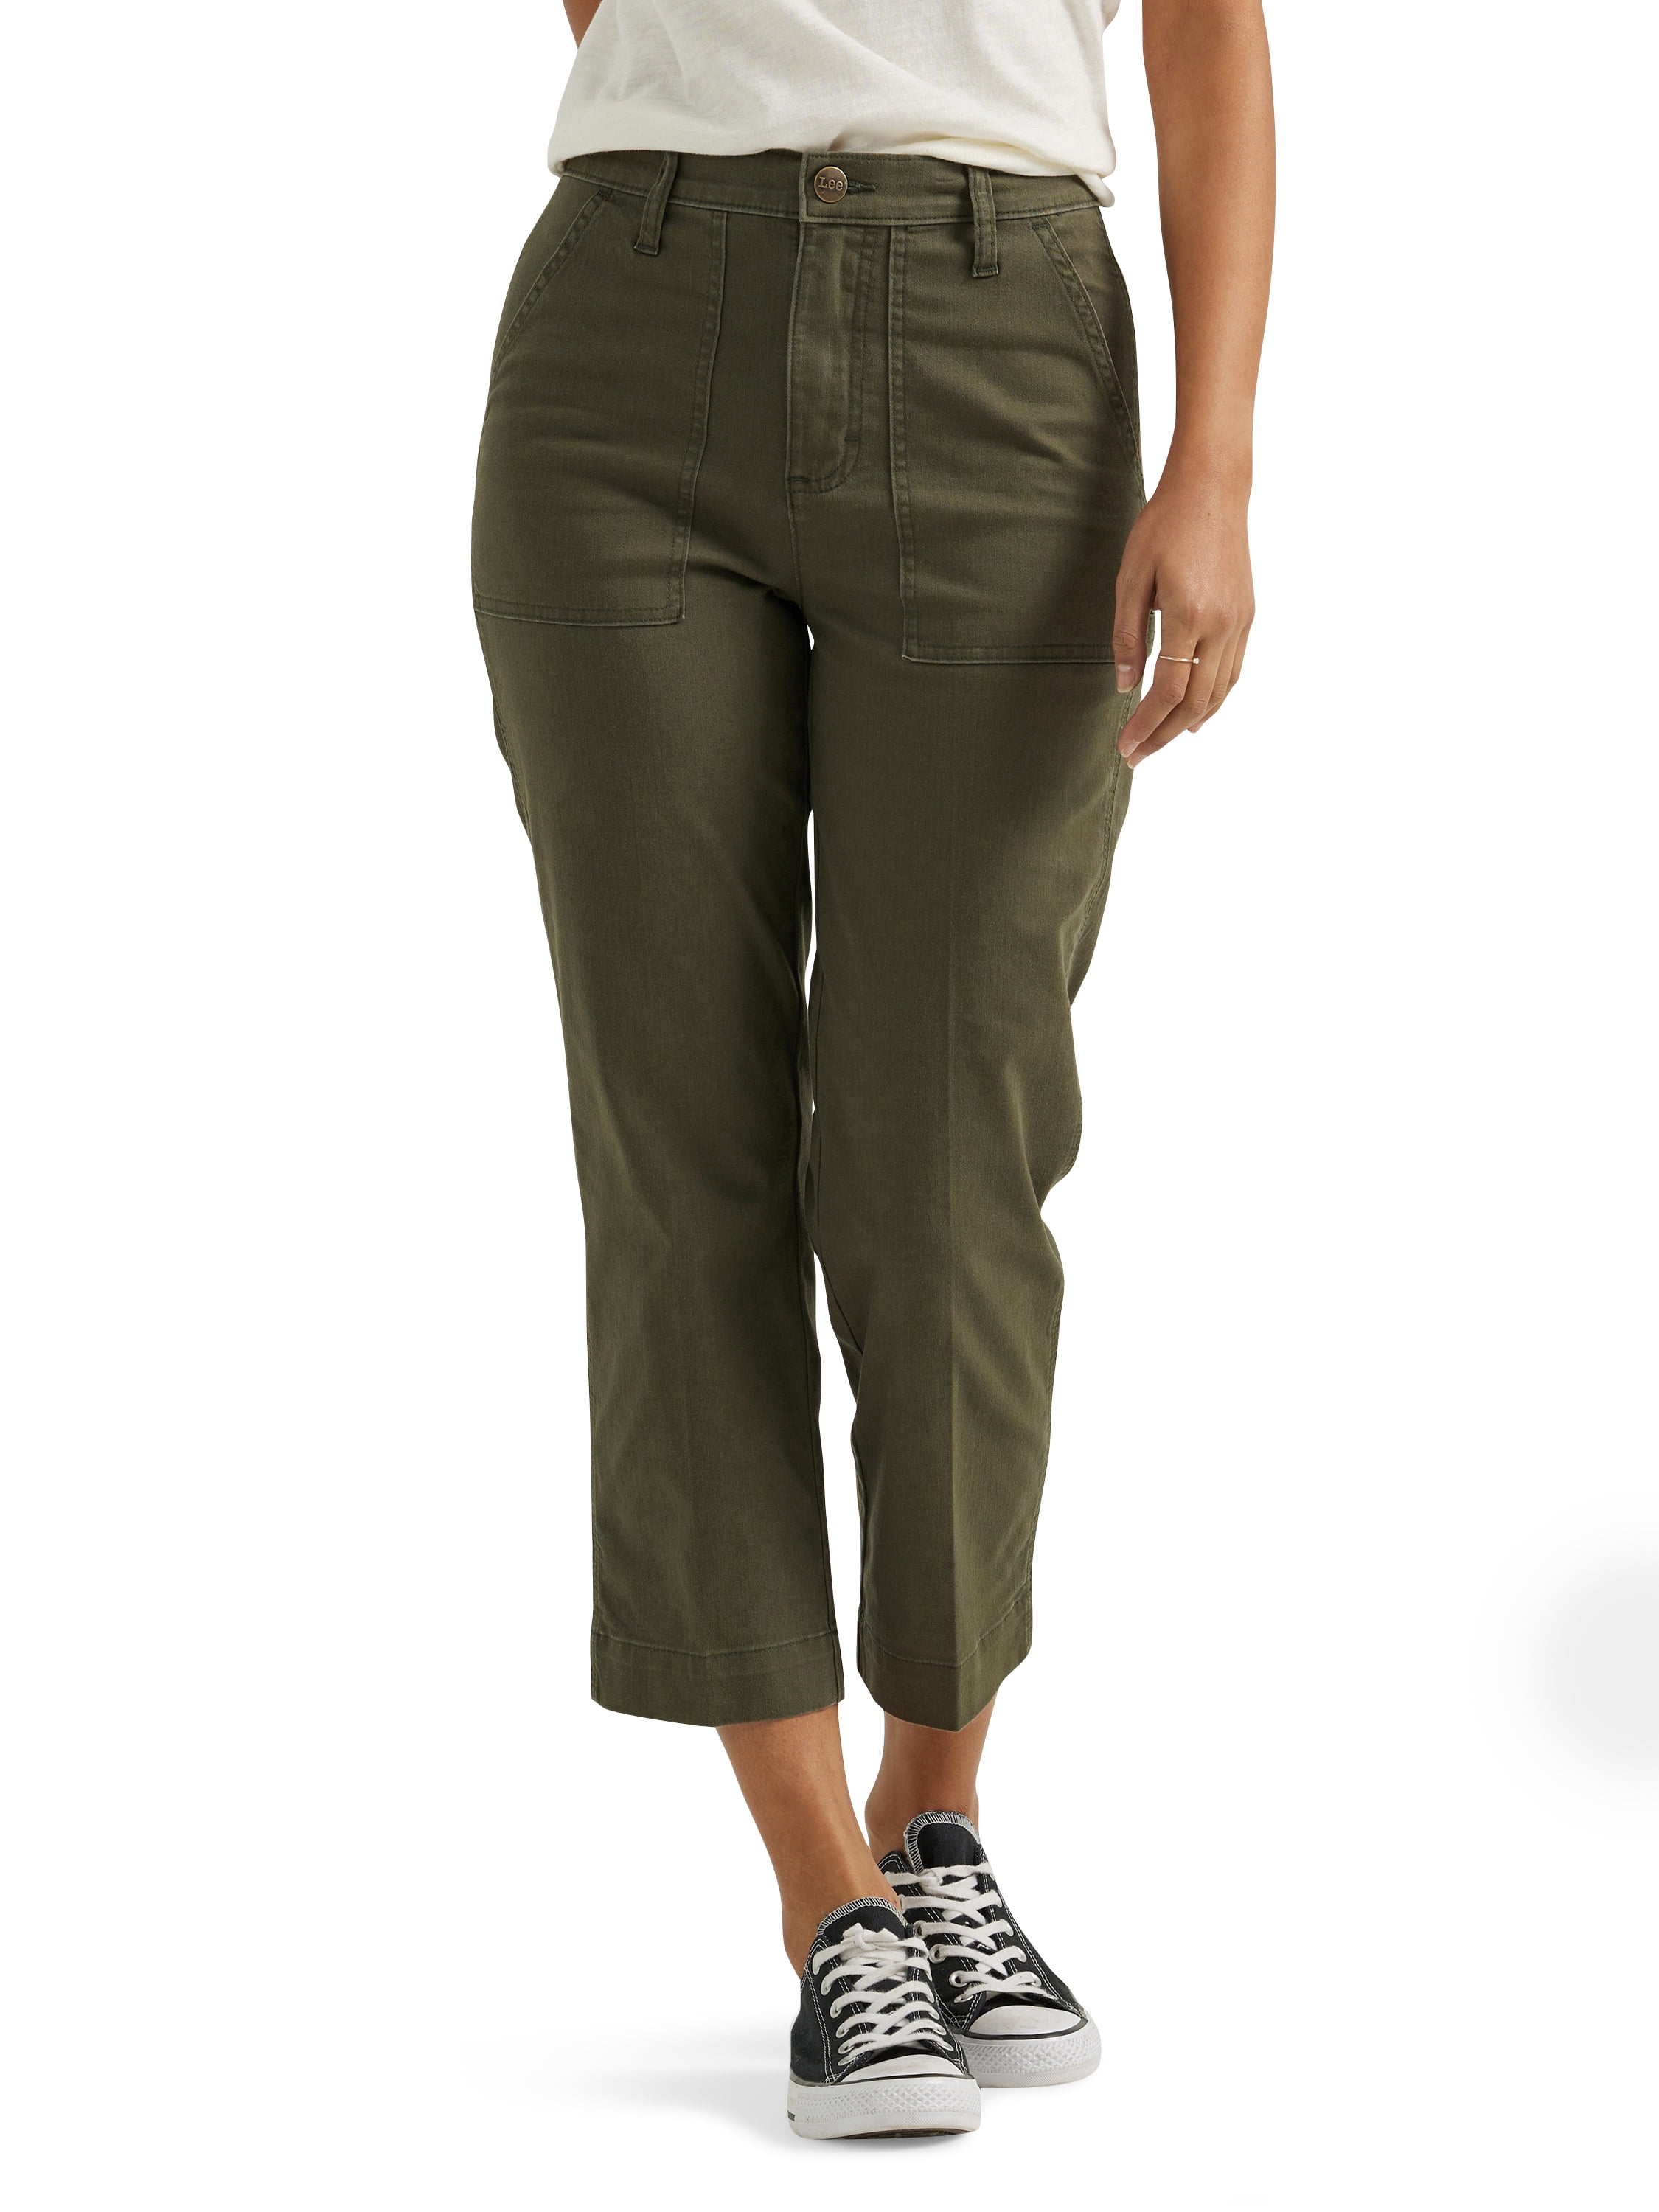 Lee® Women's Ultra Lux Relaxed Fit Seamed Crop Pant 